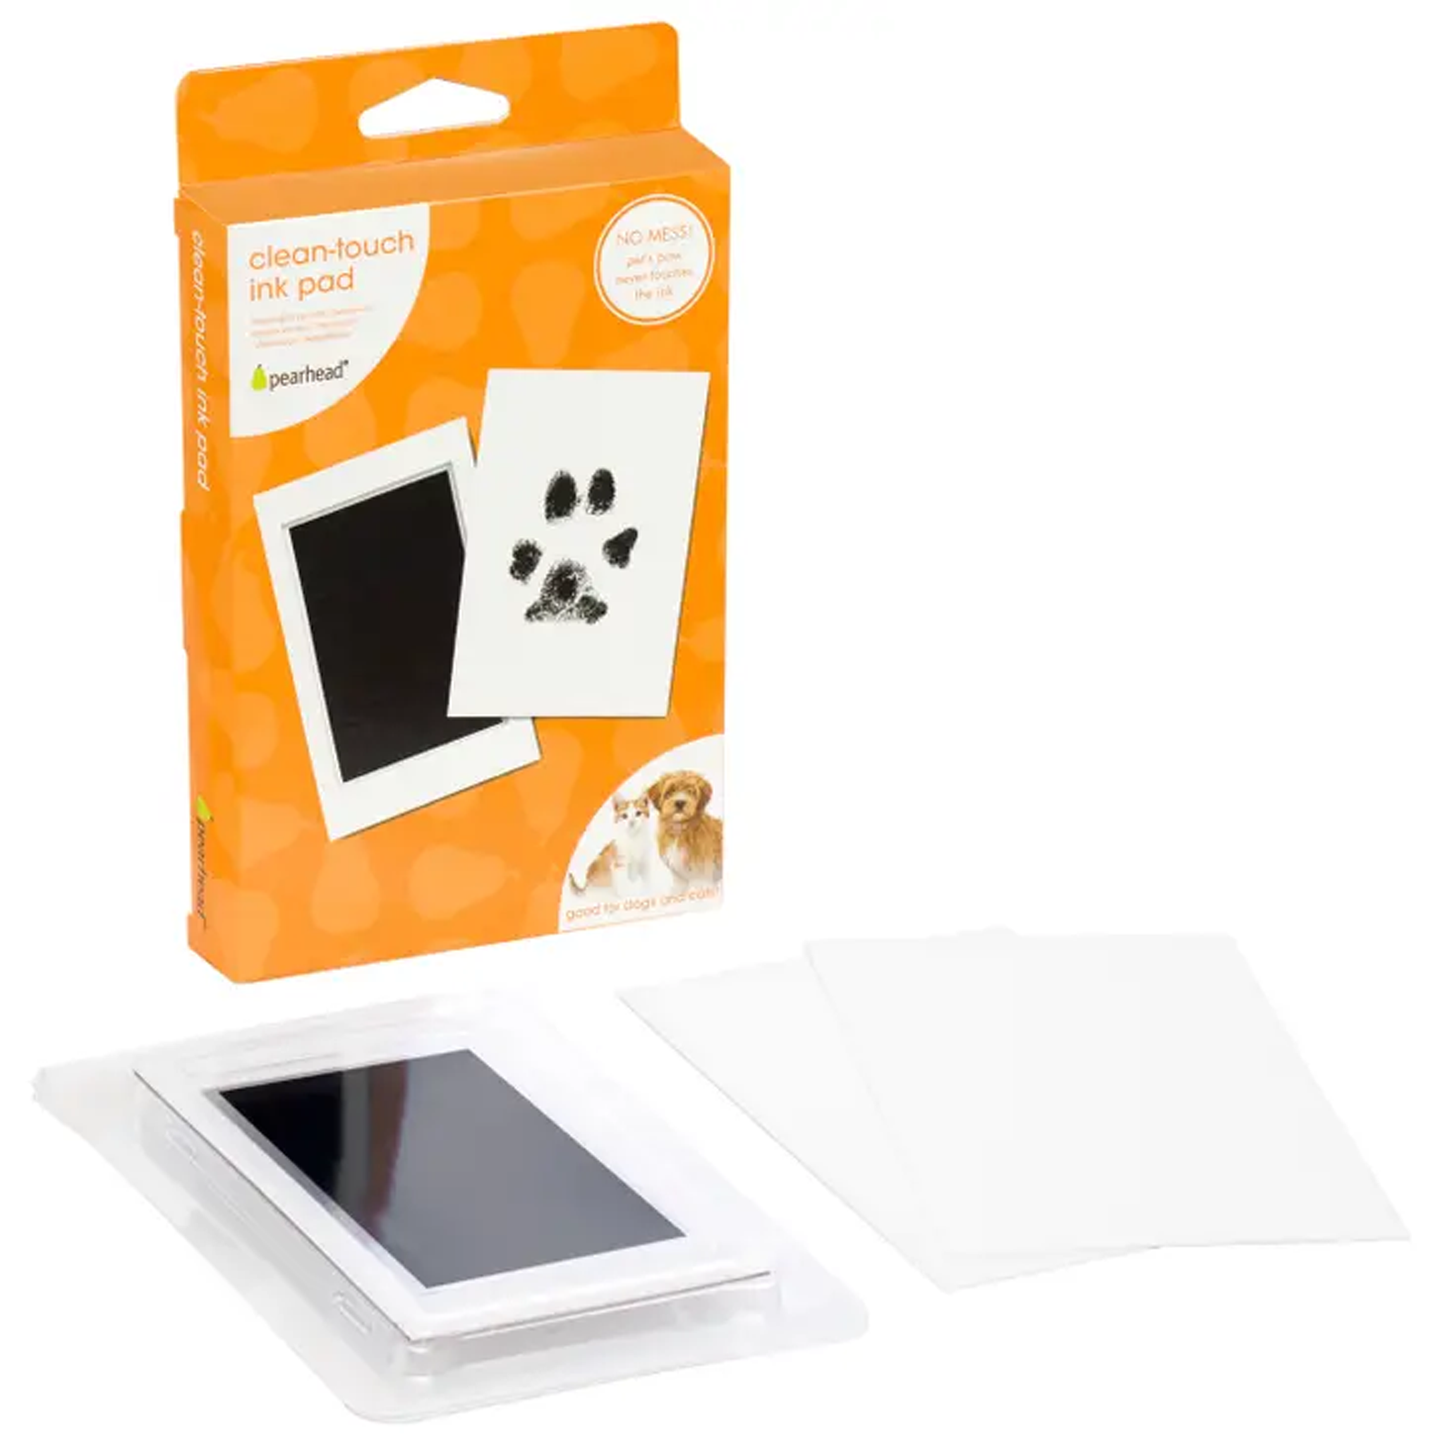 Pet Pawprint Clean Touch Ink Pad - Black